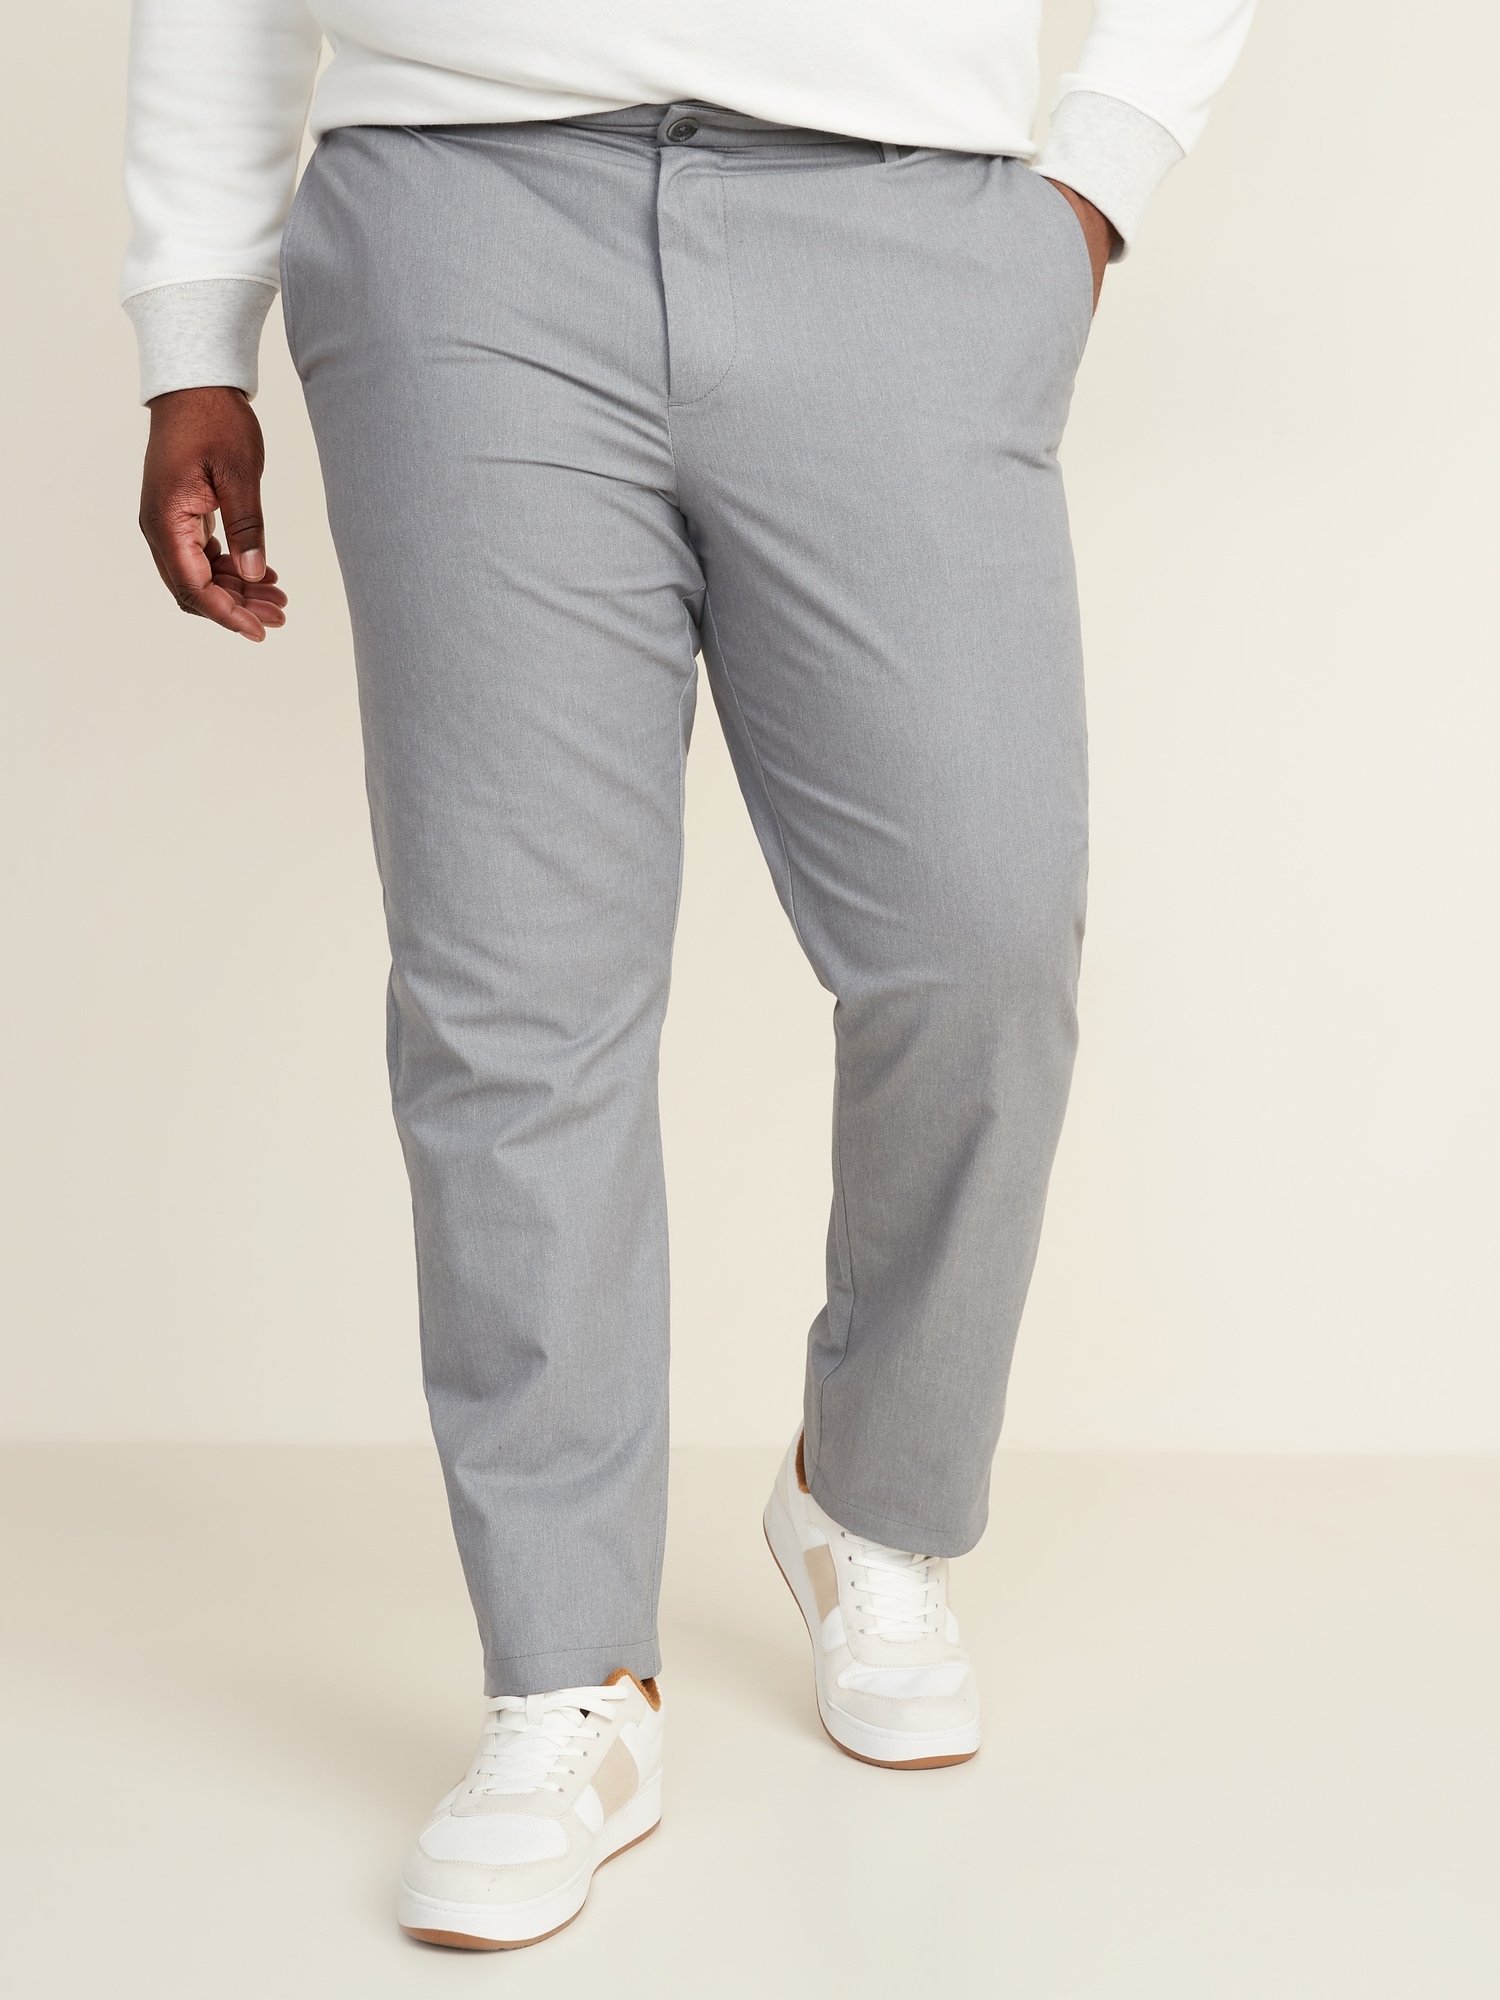 Slim Ultimate Built-In Flex Textured Chino Pants | Old Navy